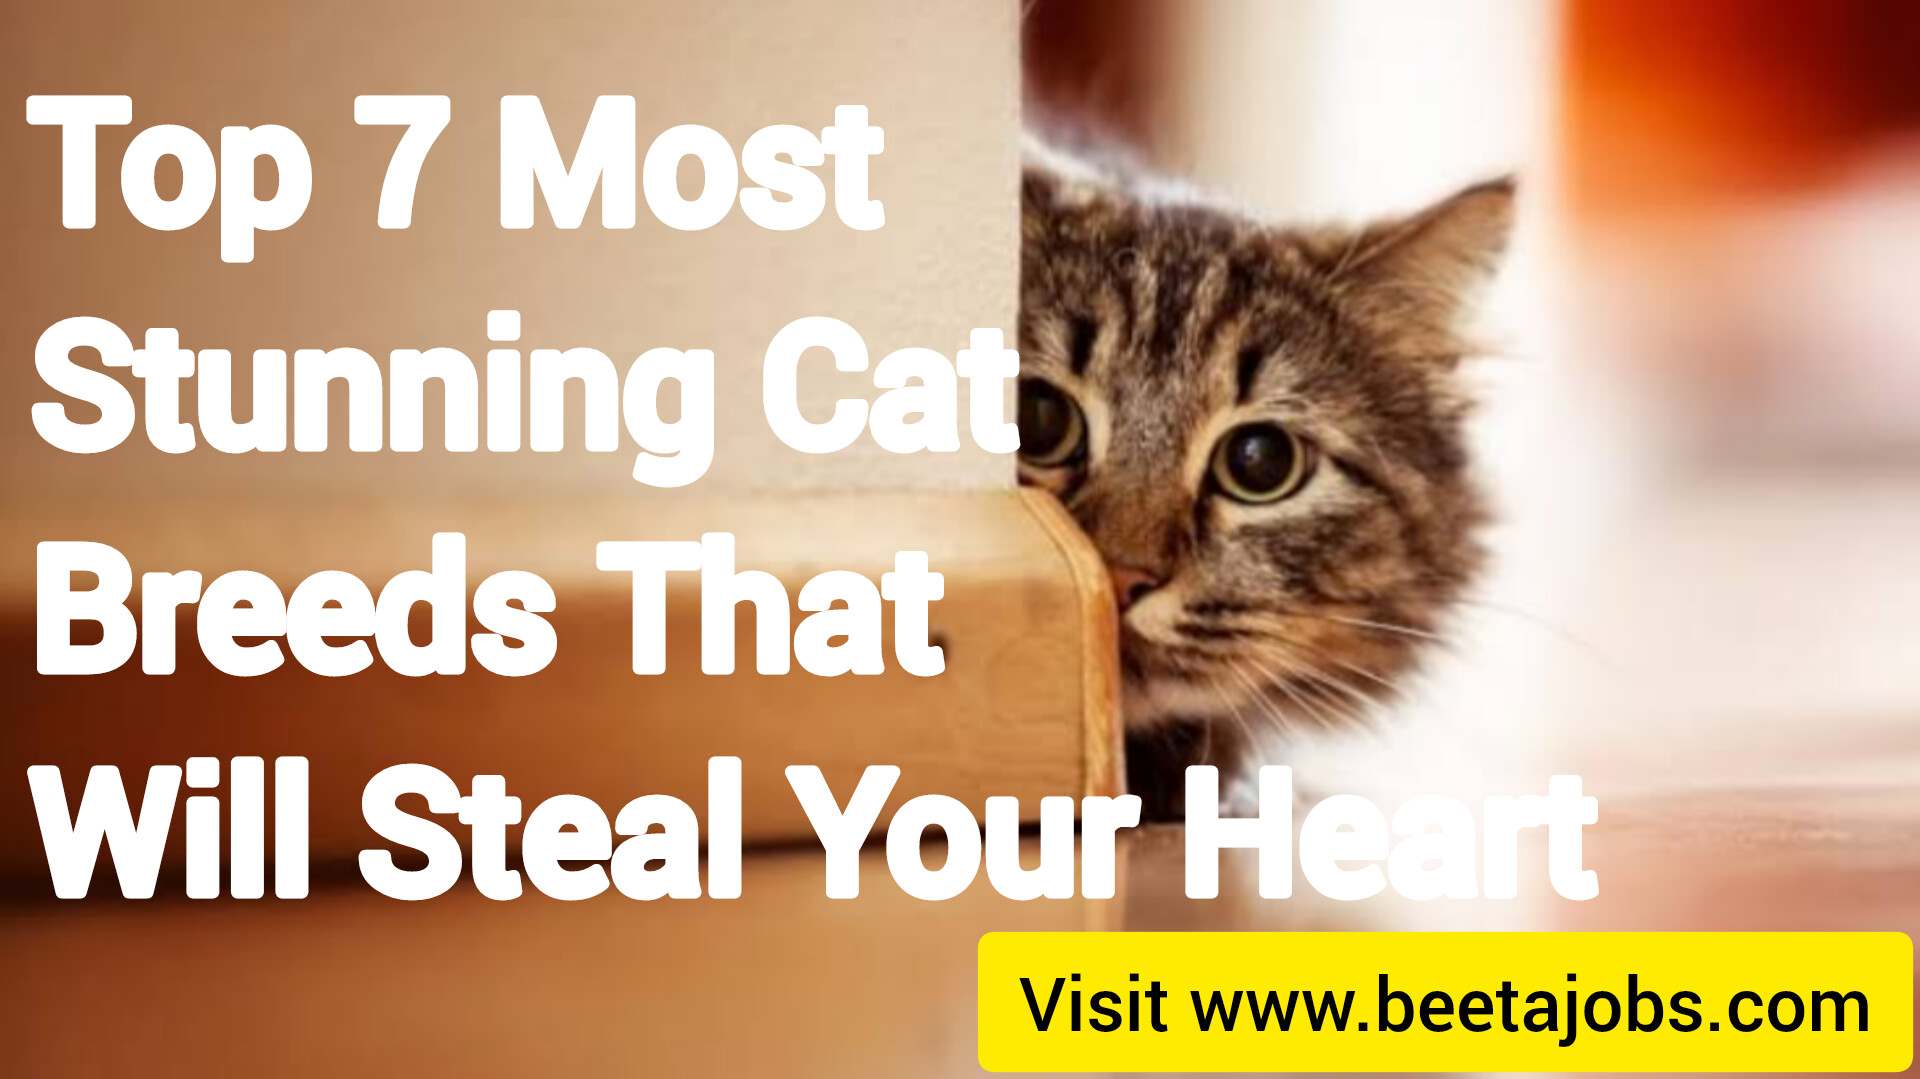 Top 7 Most Stunning Cat Breeds That Will Steal Your Heart